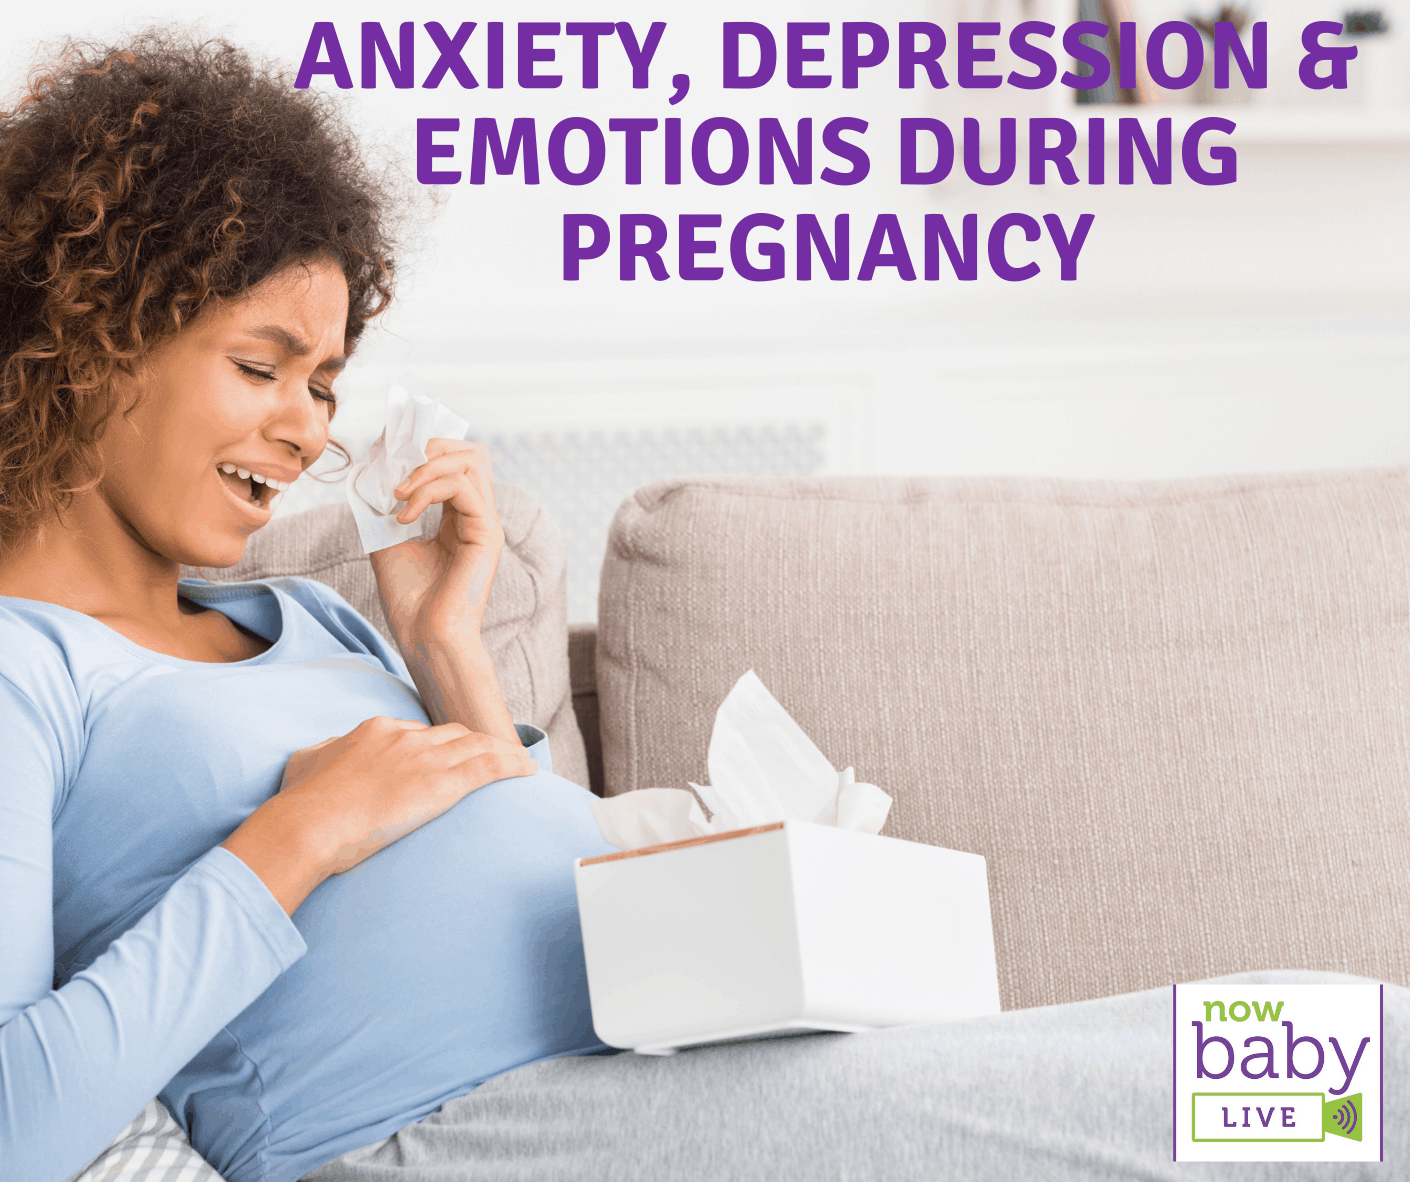 Is this the last taboo? – Anxiety, depression & emotions during pregnancy